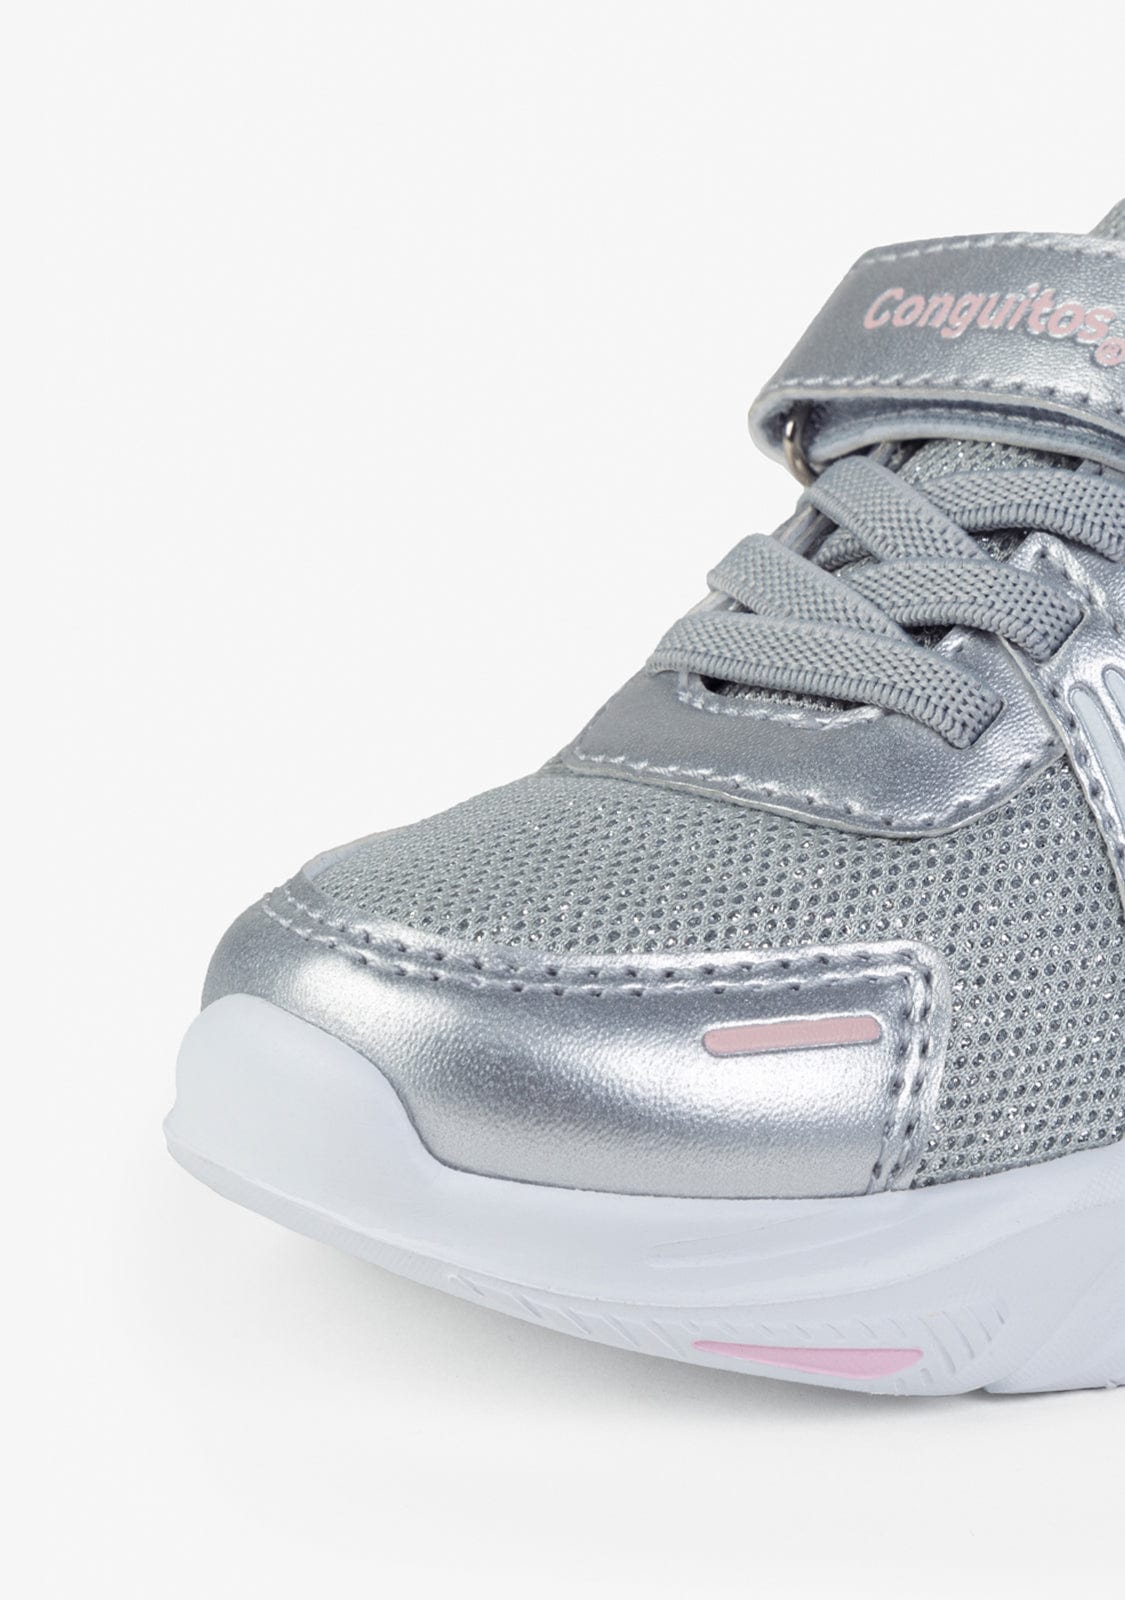 CONGUITOS Shoes Girl's Silver Sneakers with Lights